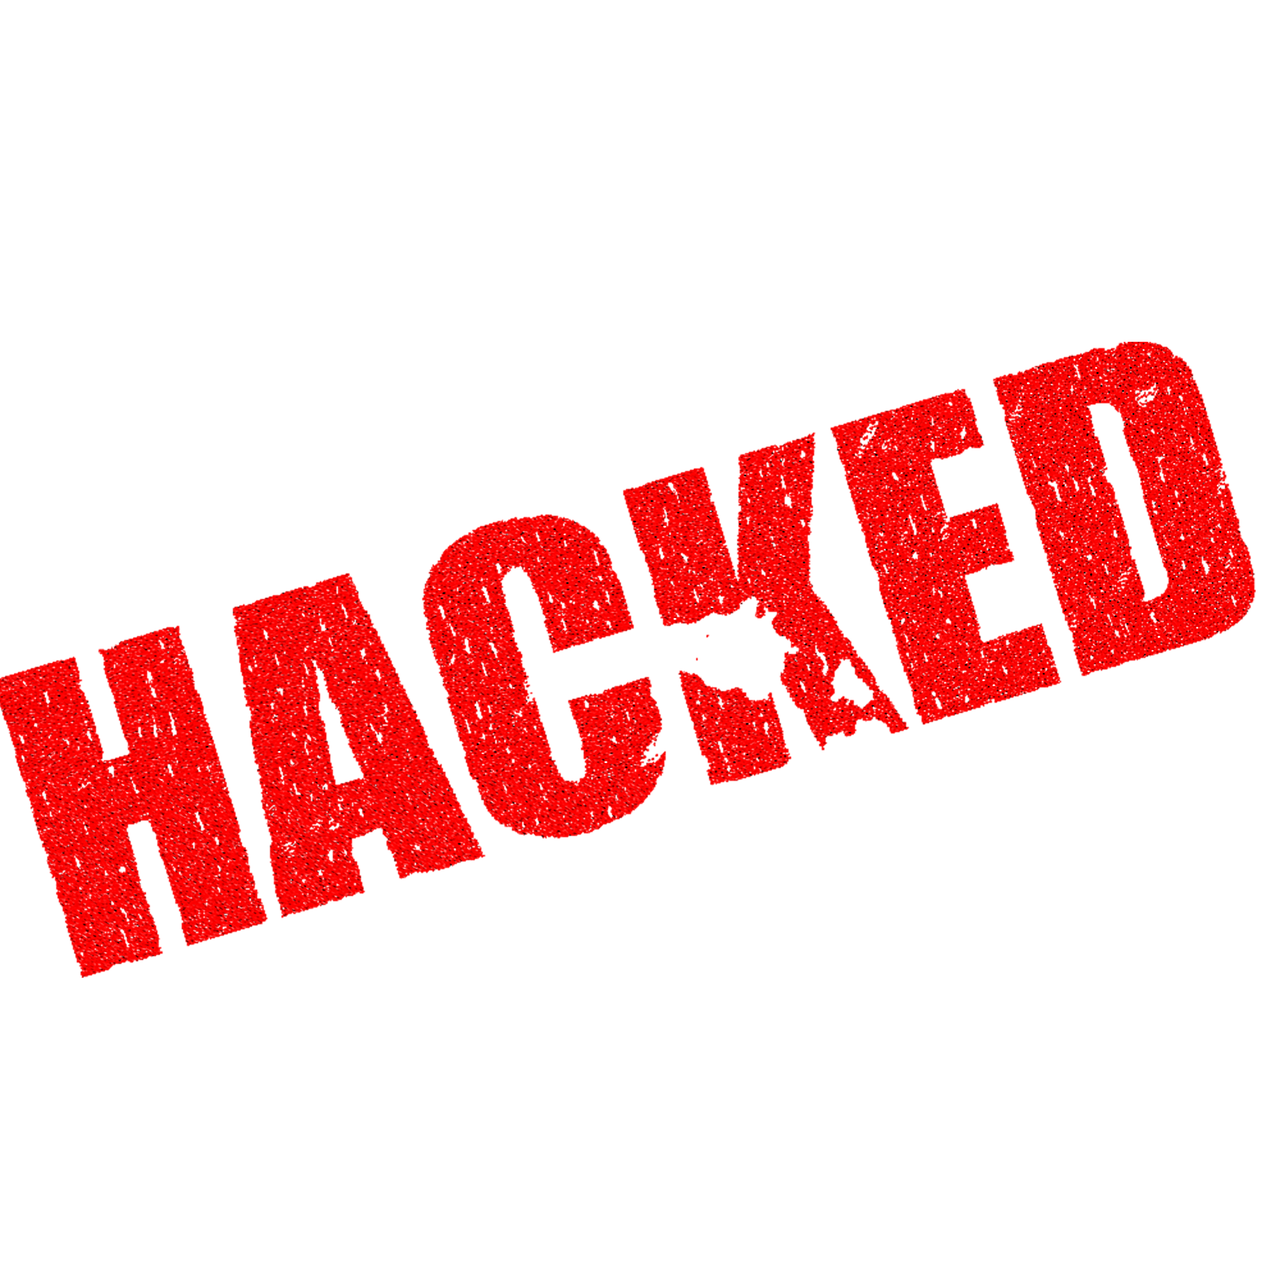 hacked cyber crime computer free photo